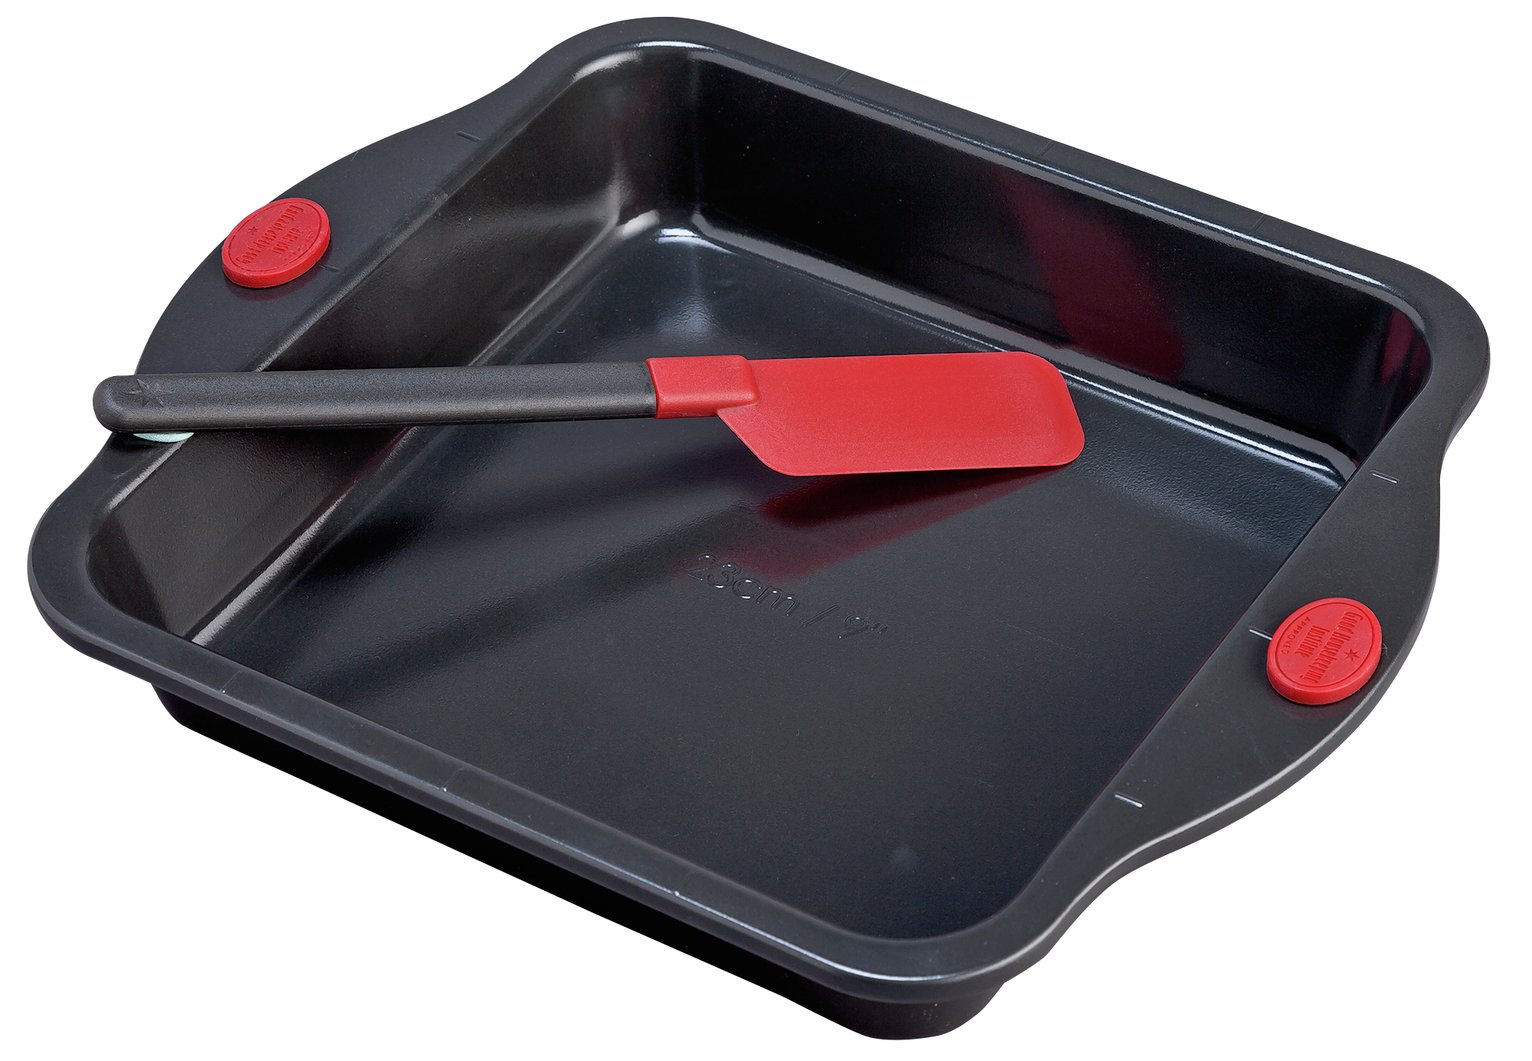 Good Housekeeping 23cm Baking Tray and Spatula Review